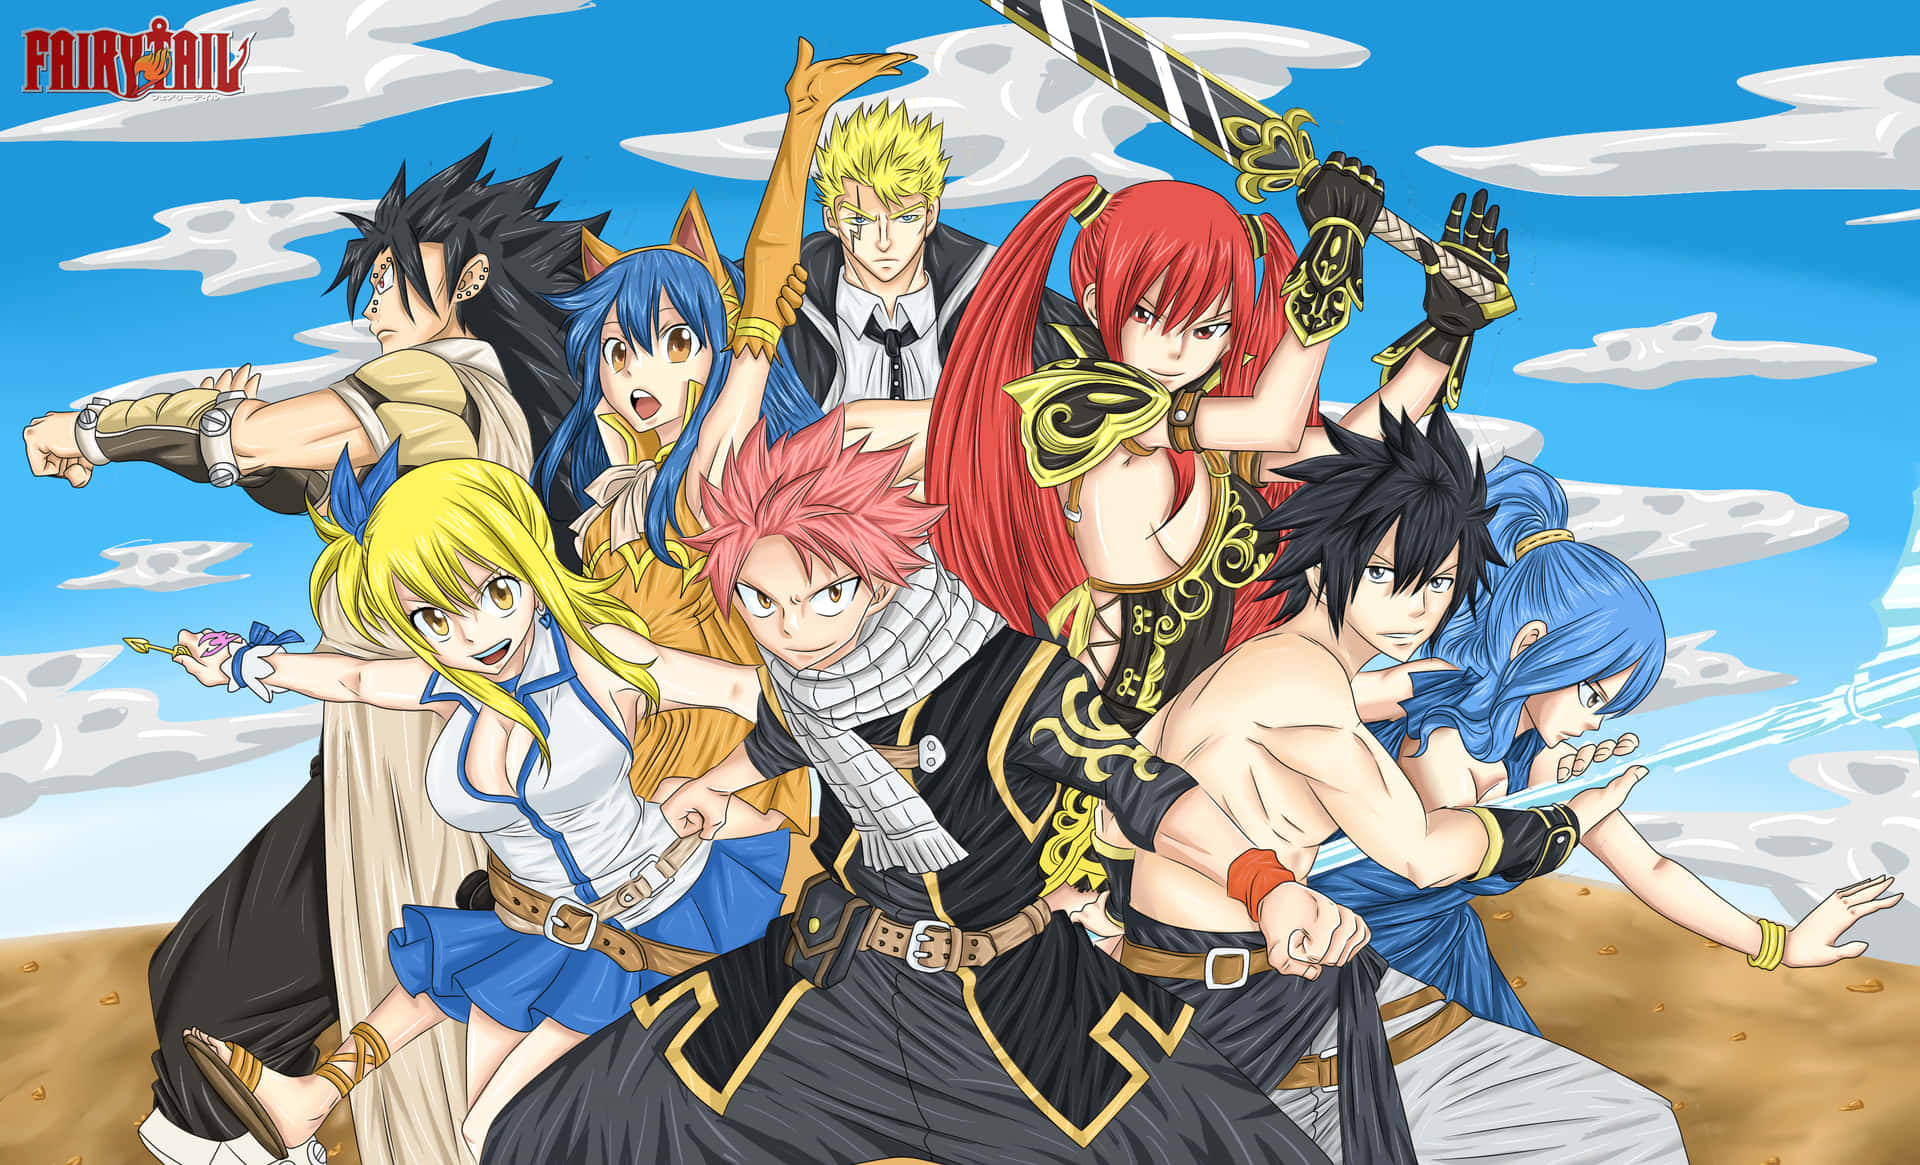 Join Natsu on an adventure of magic and friendship in Fairy Tail.